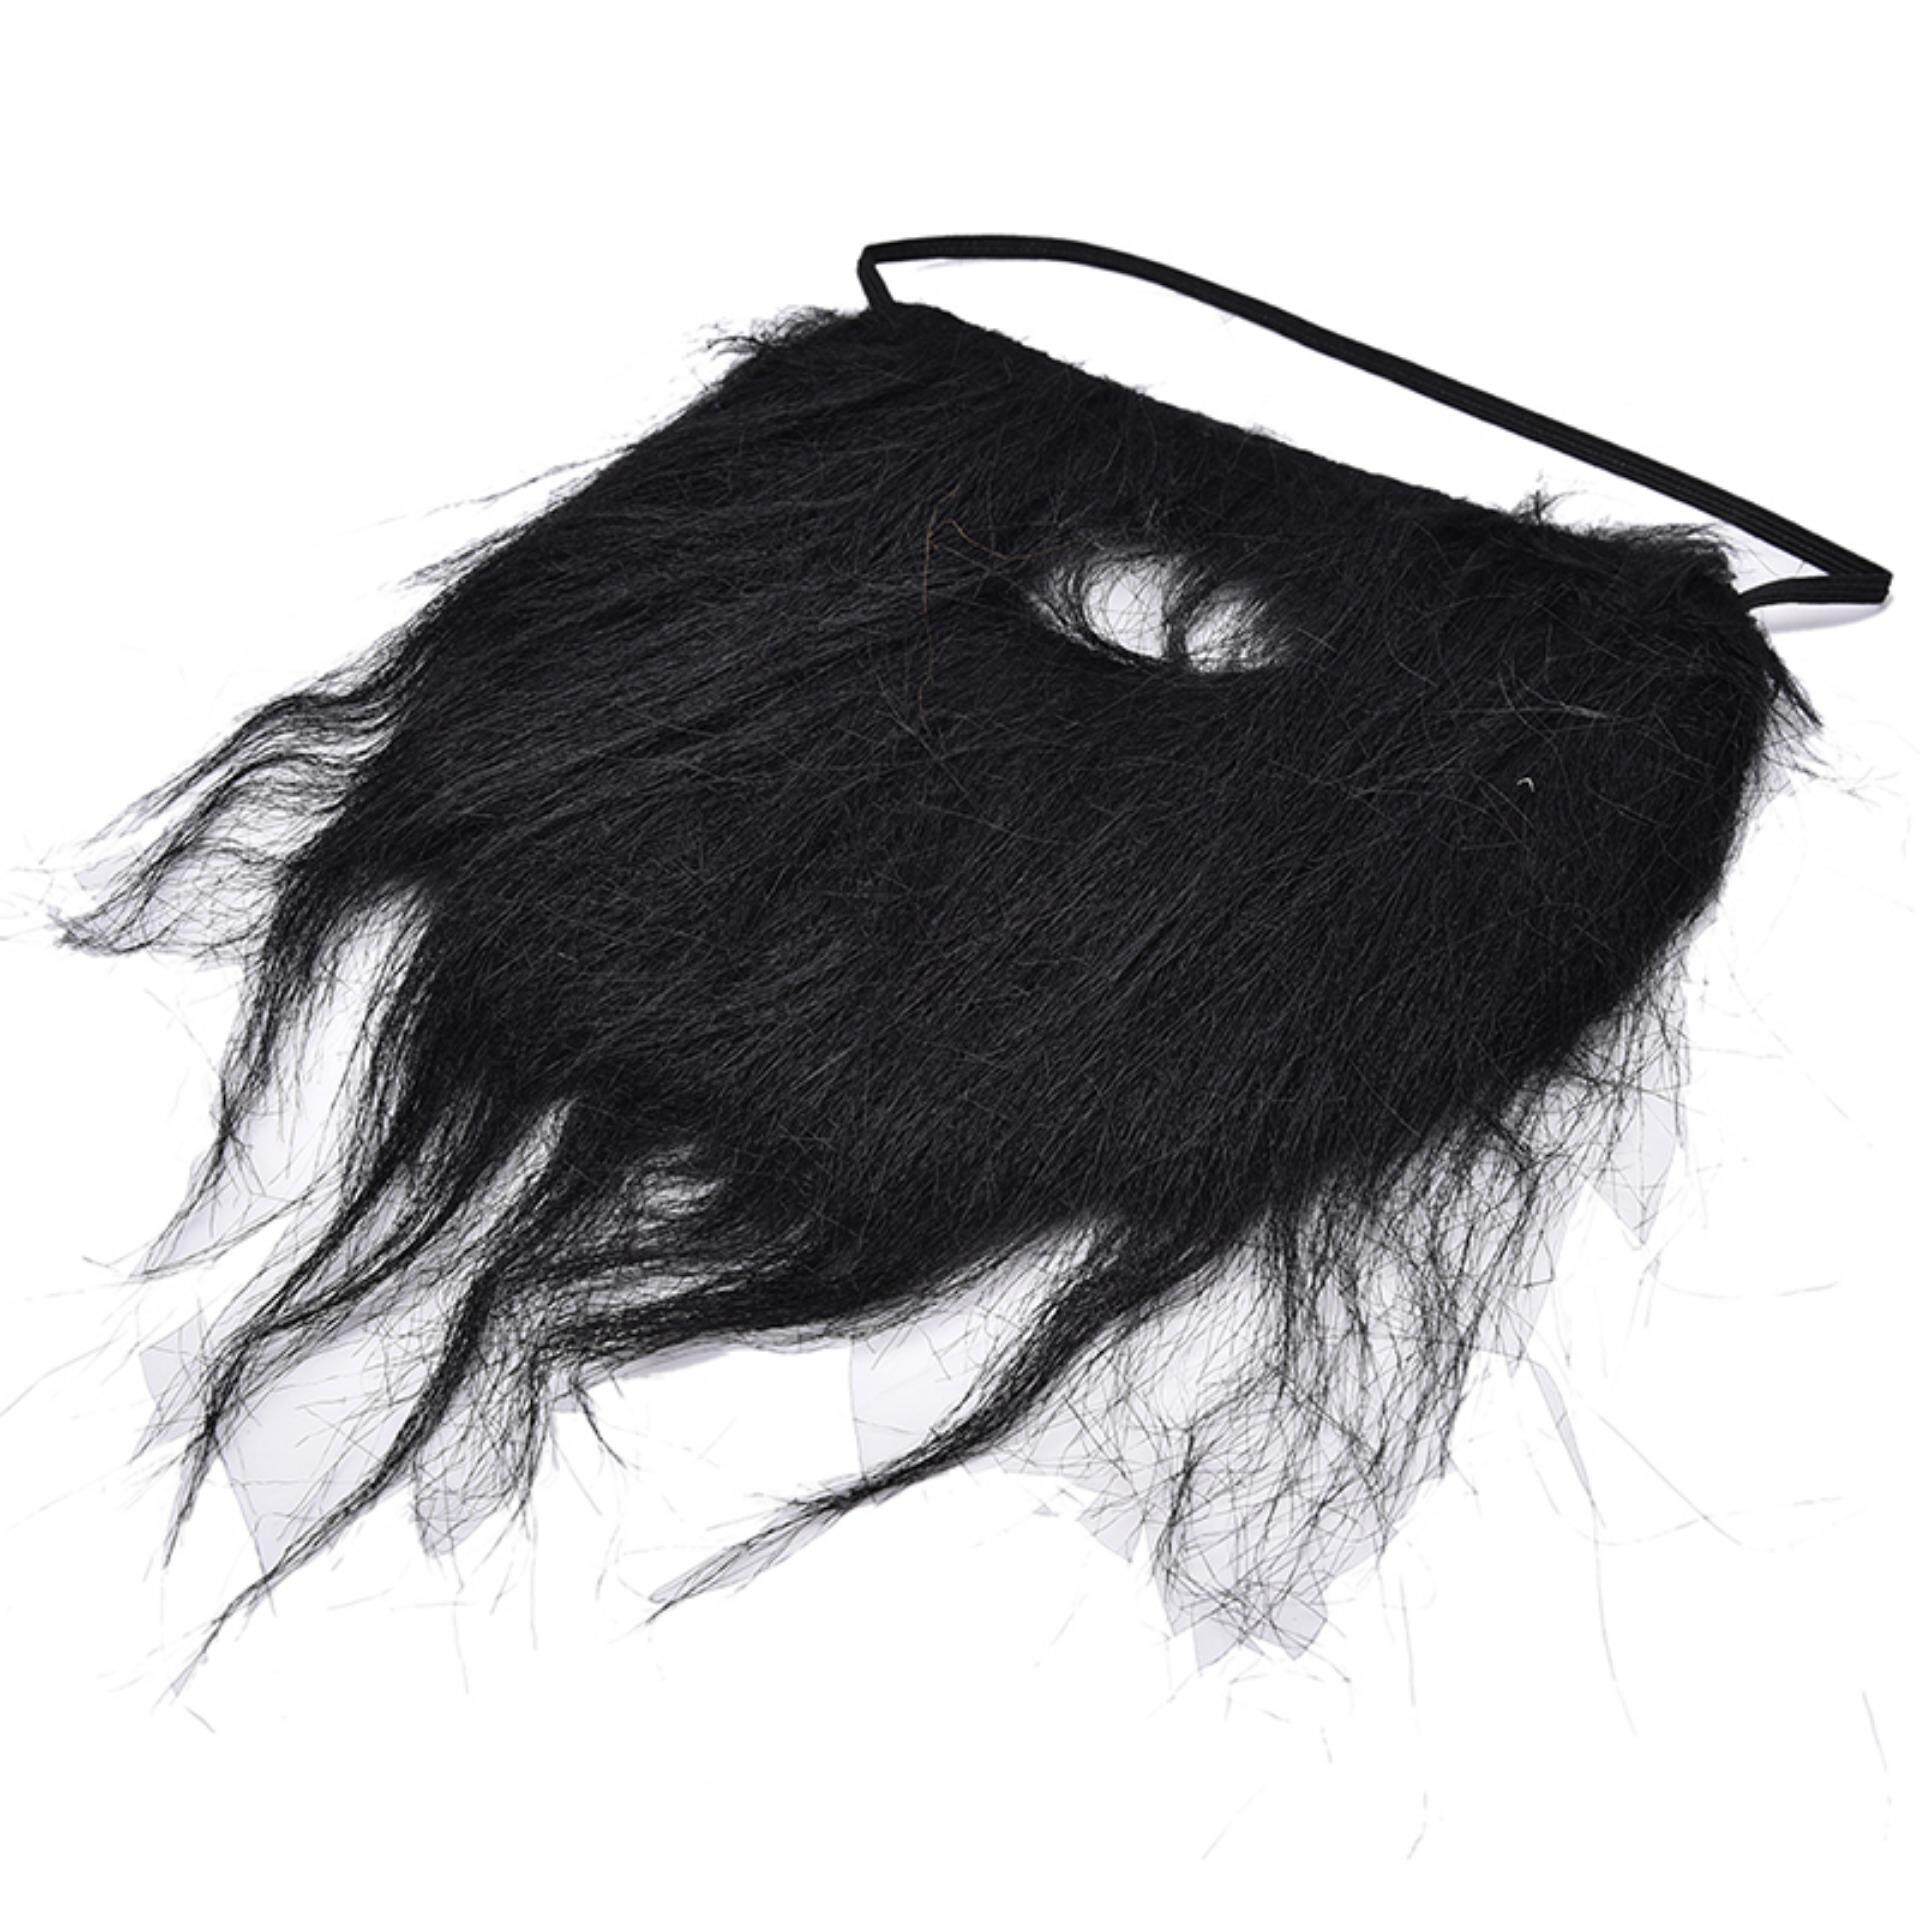 Cosplay Costume Party Male Man Halloween Long Beard Facial Hair Disguise Game Mustache Black